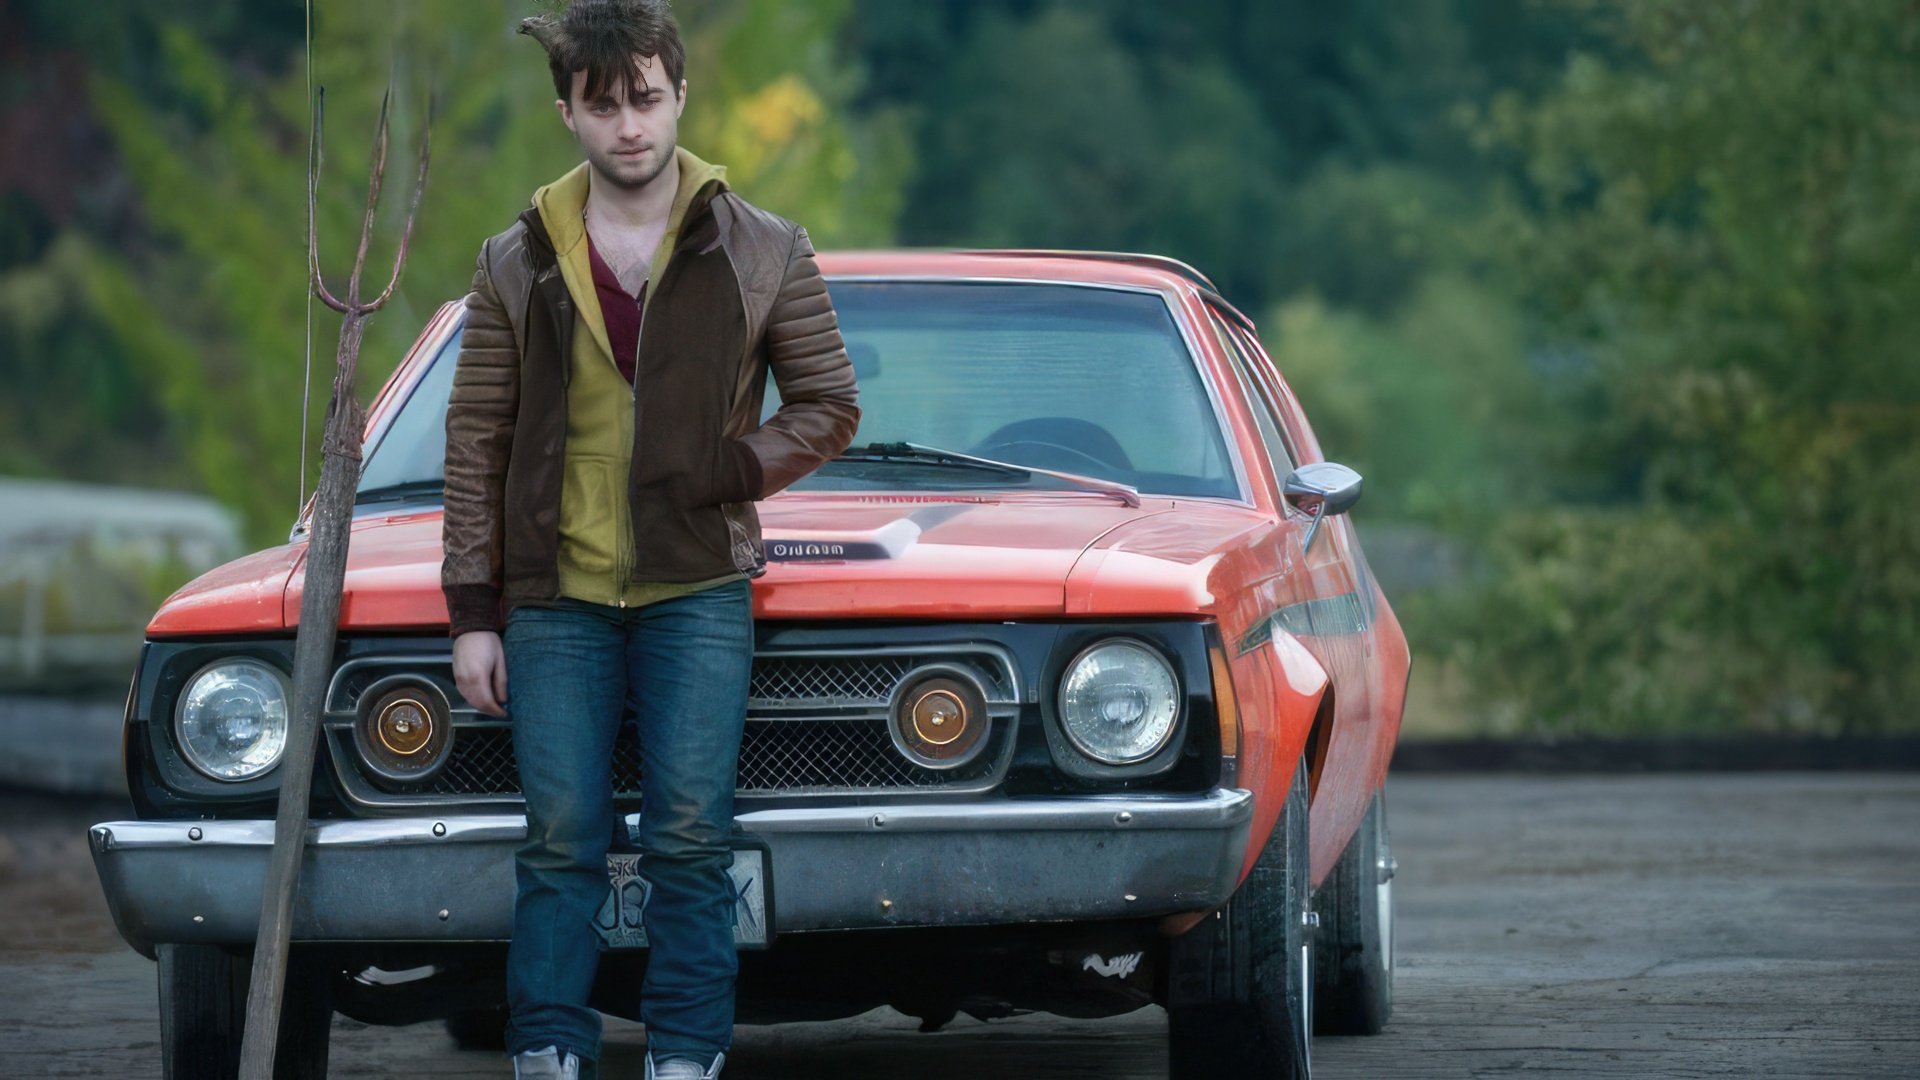 Daniel Radcliffe in the movie Horns